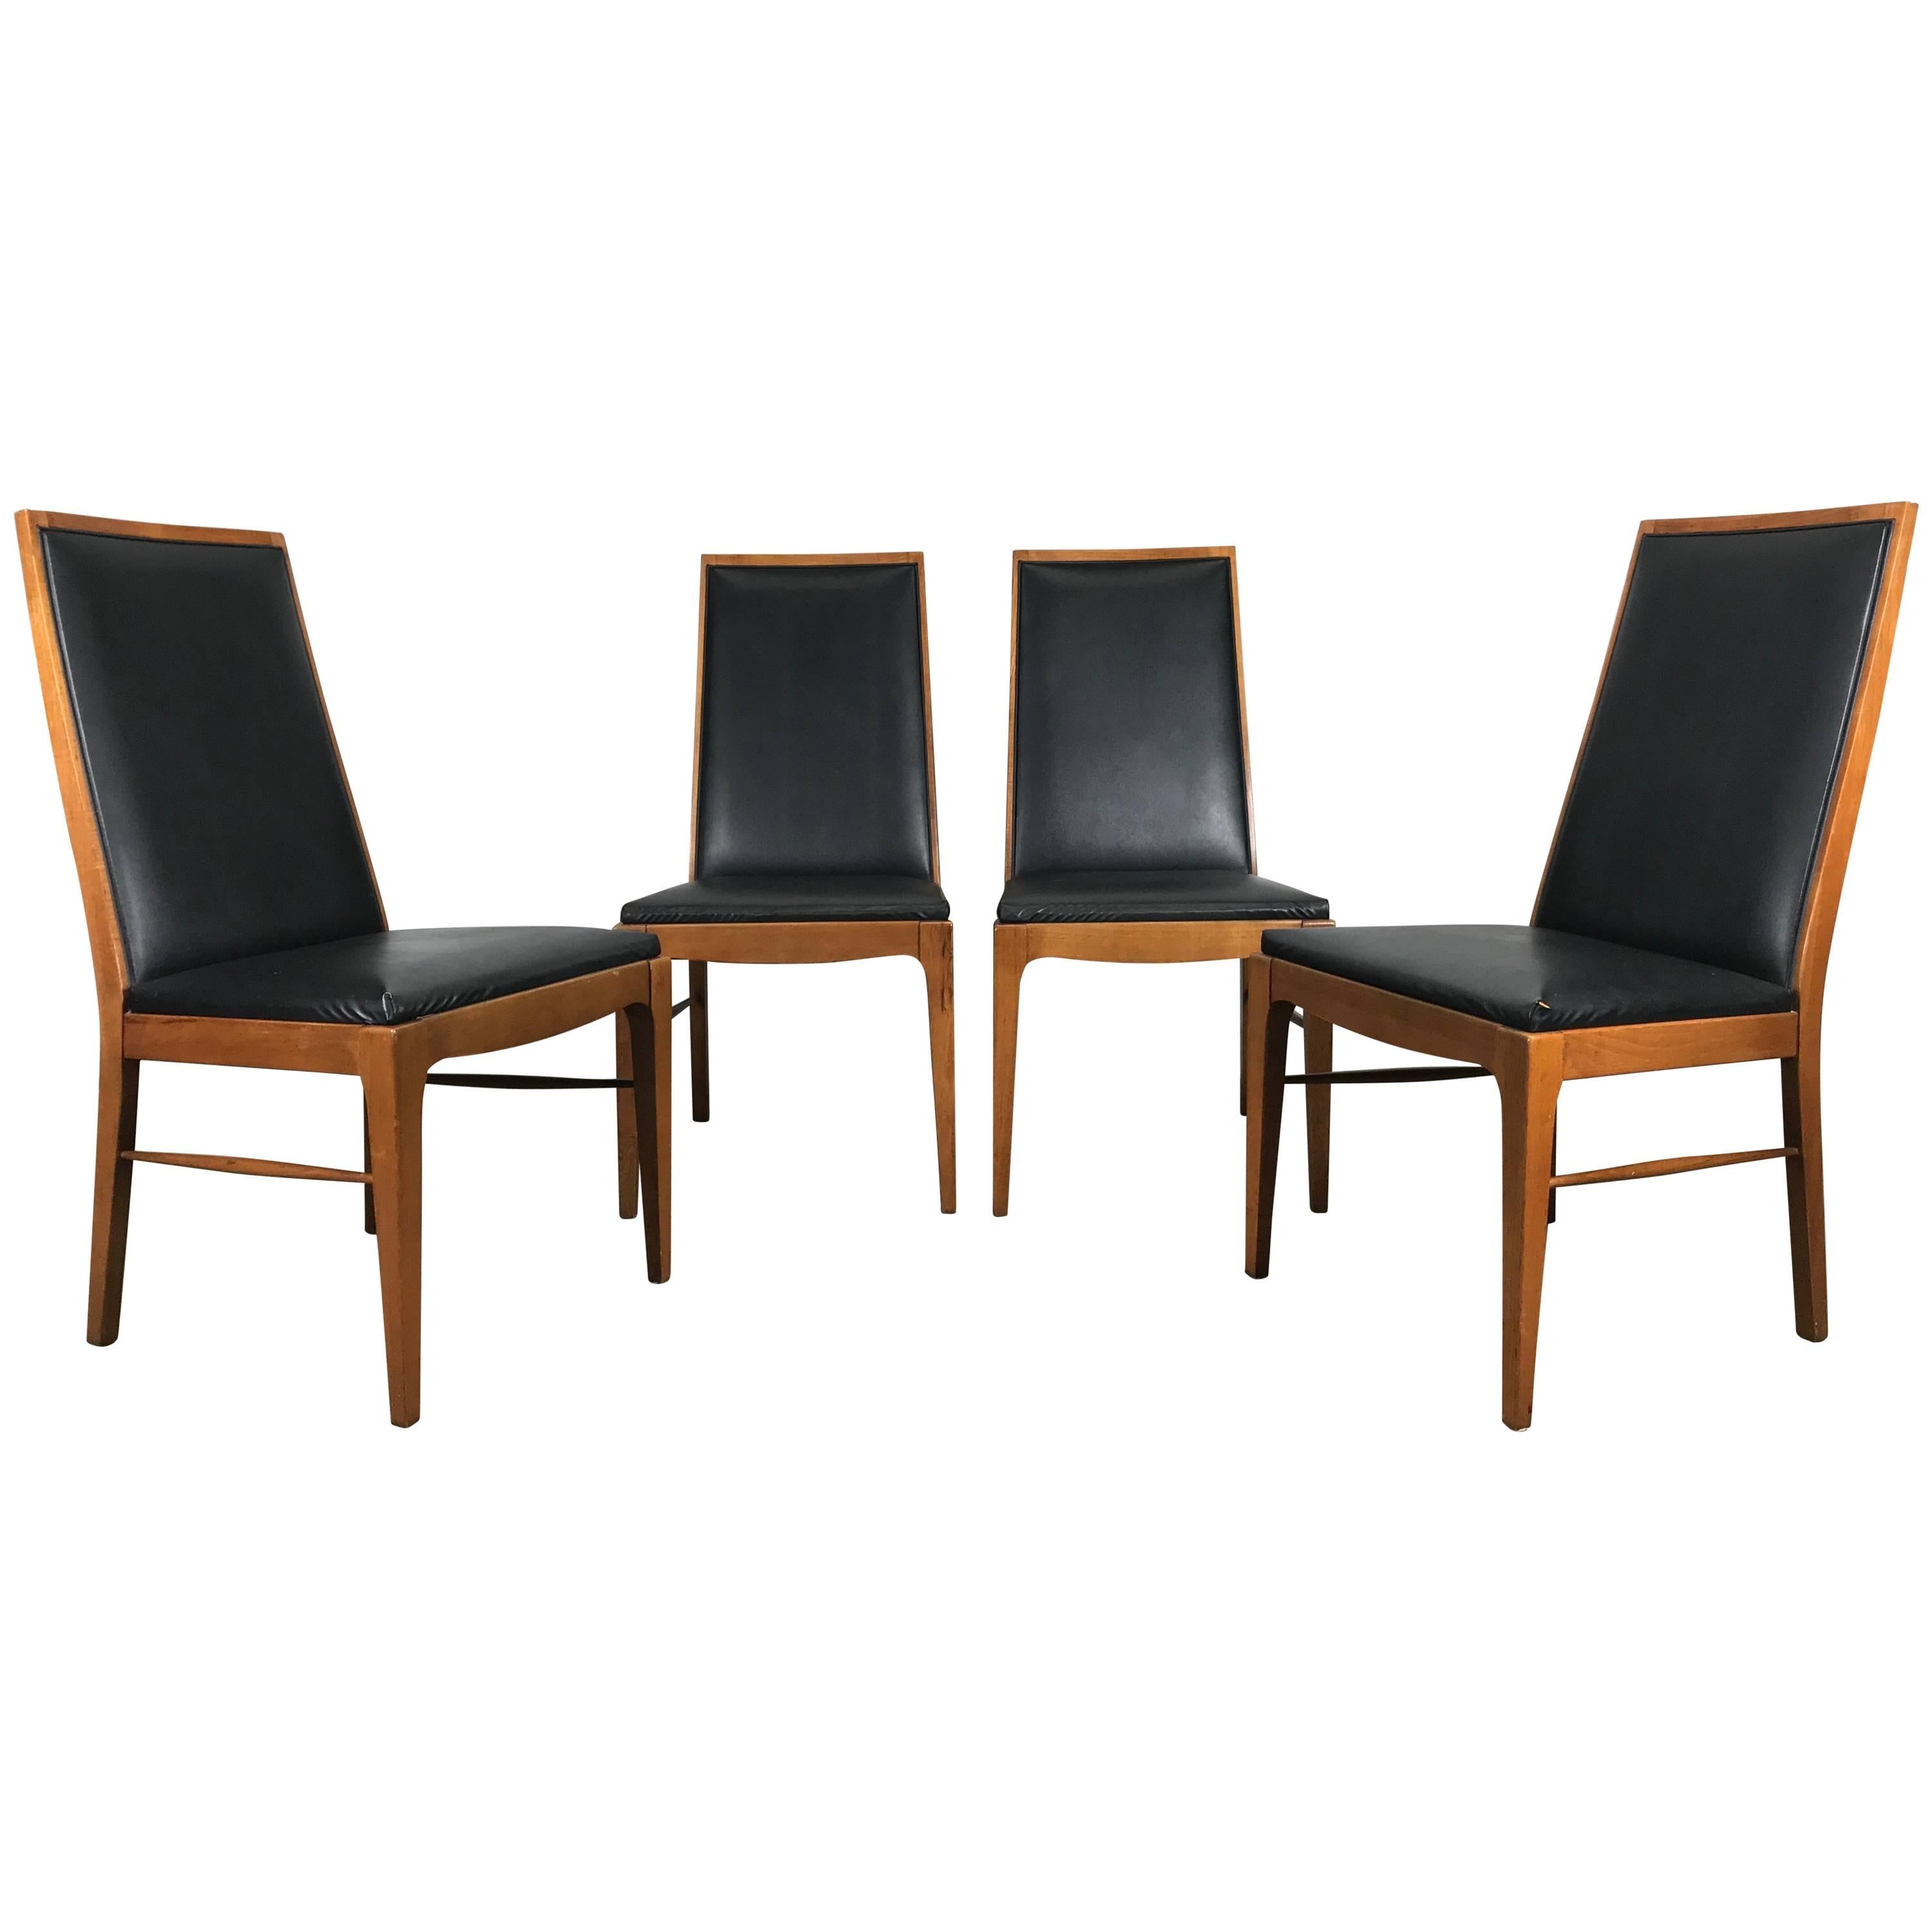 Set of Four Modernist Walnut Dining Chairs by Lane